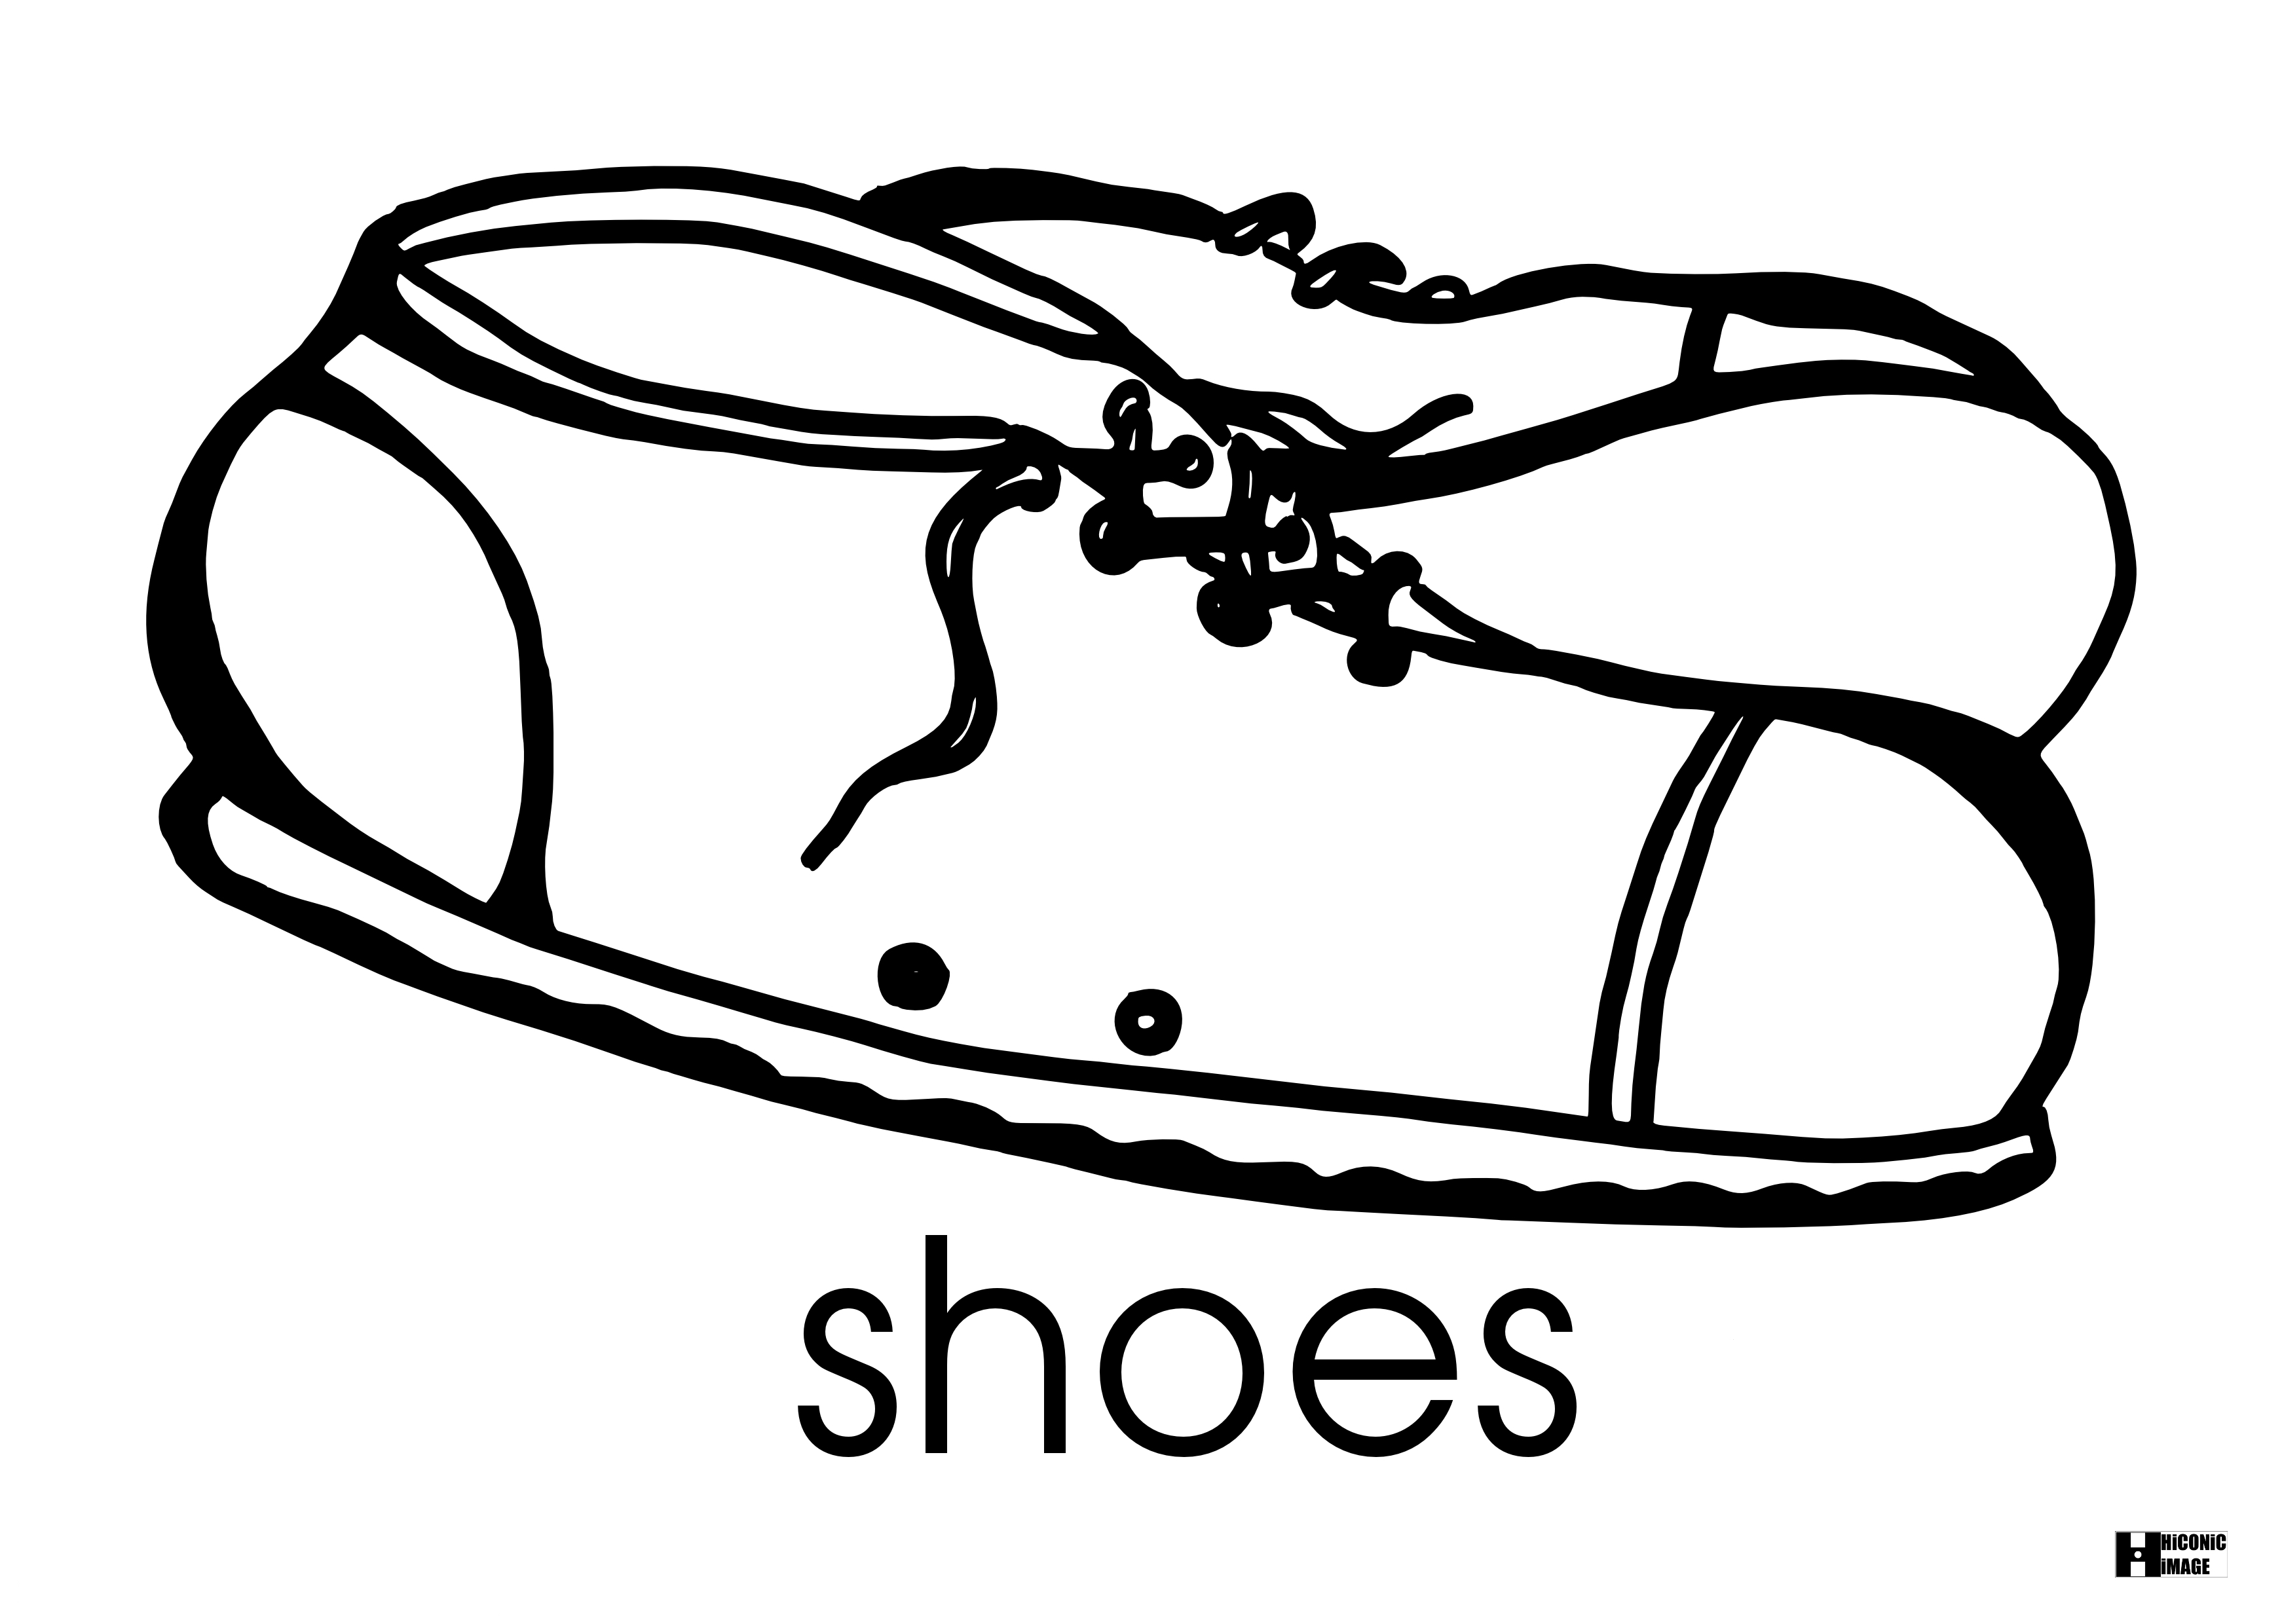 Shoes Flashcard for Kids чб